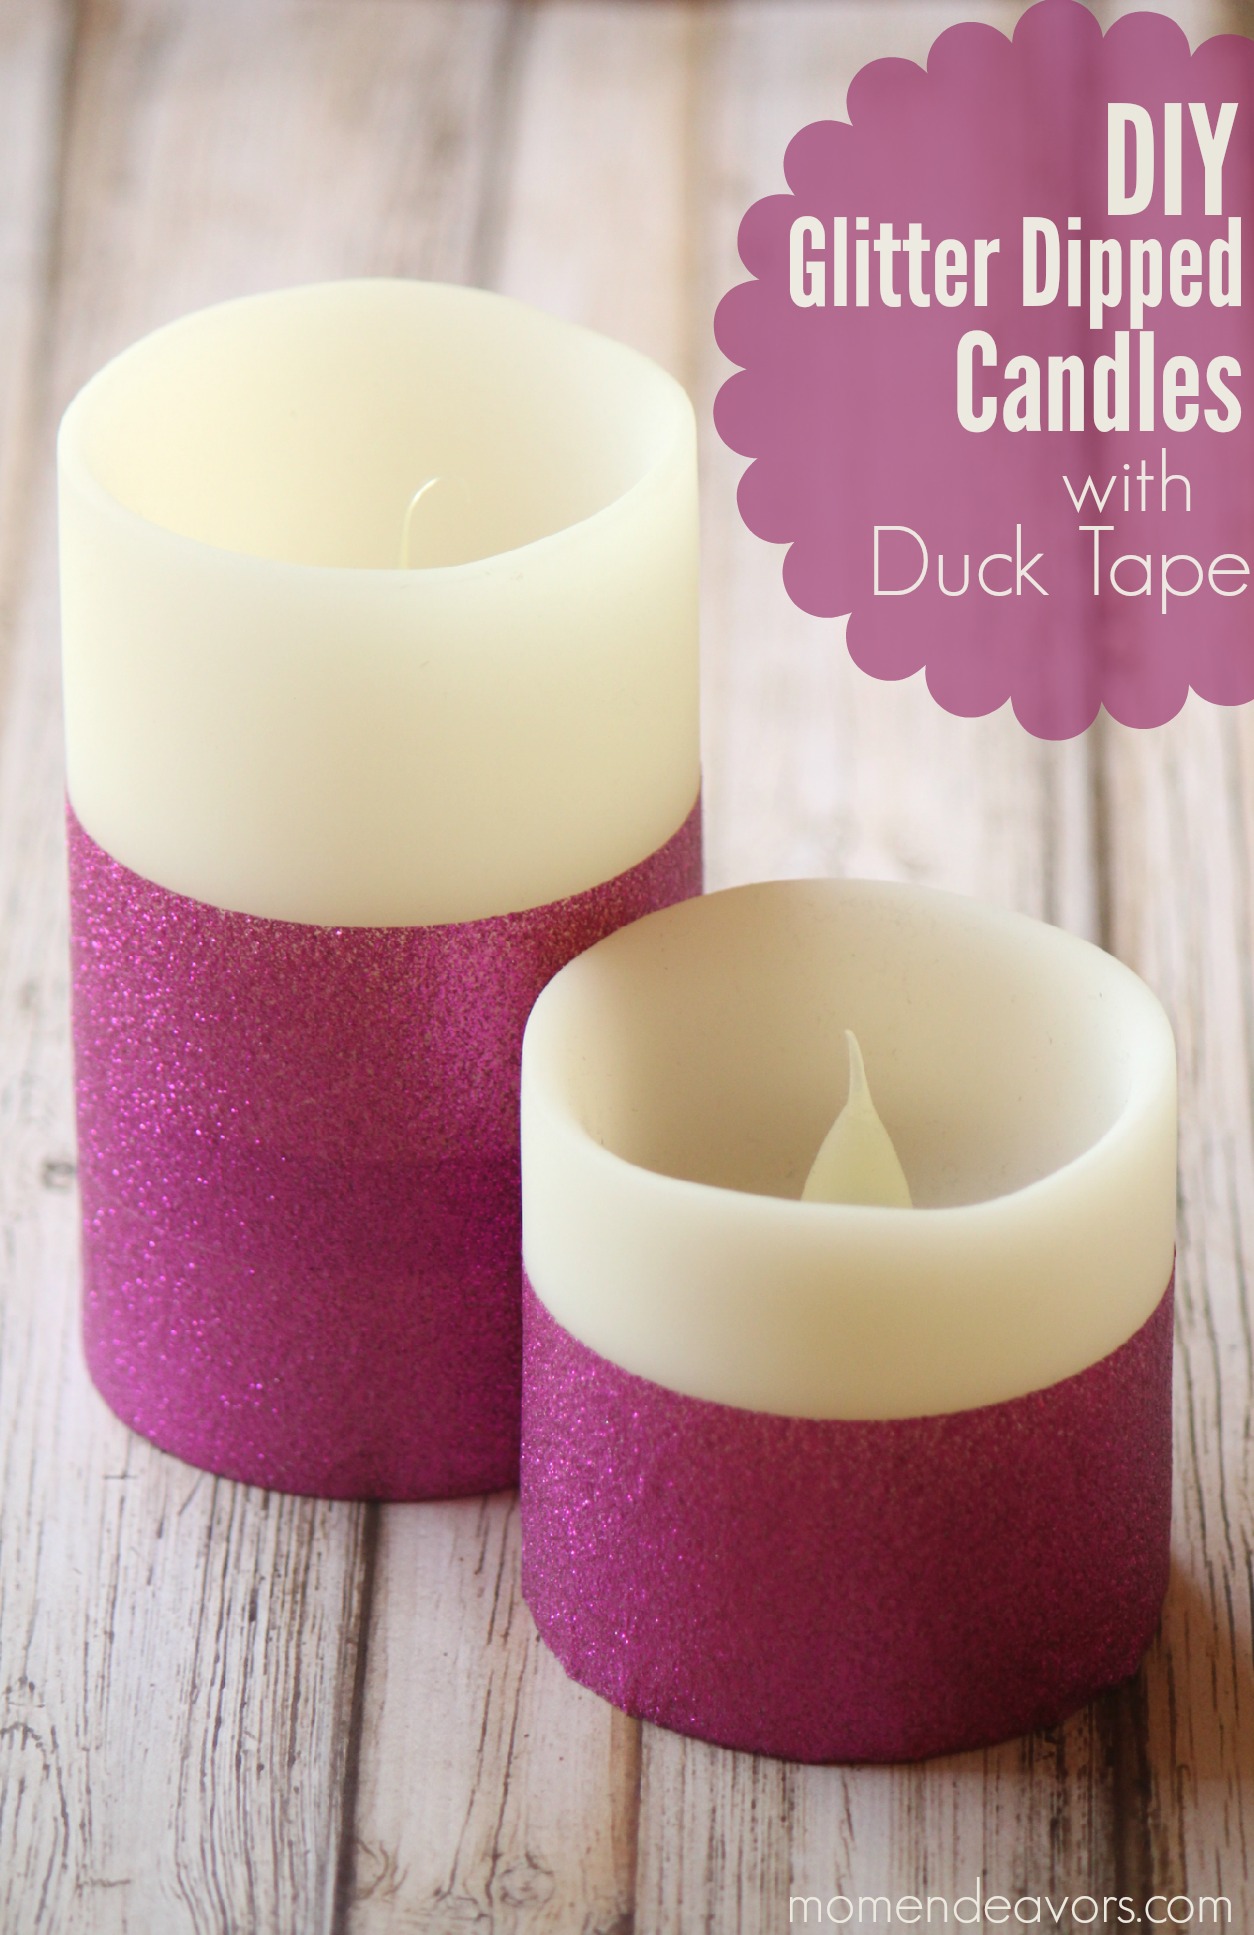 DIY Glitter Dipped Candles with Duck Tape